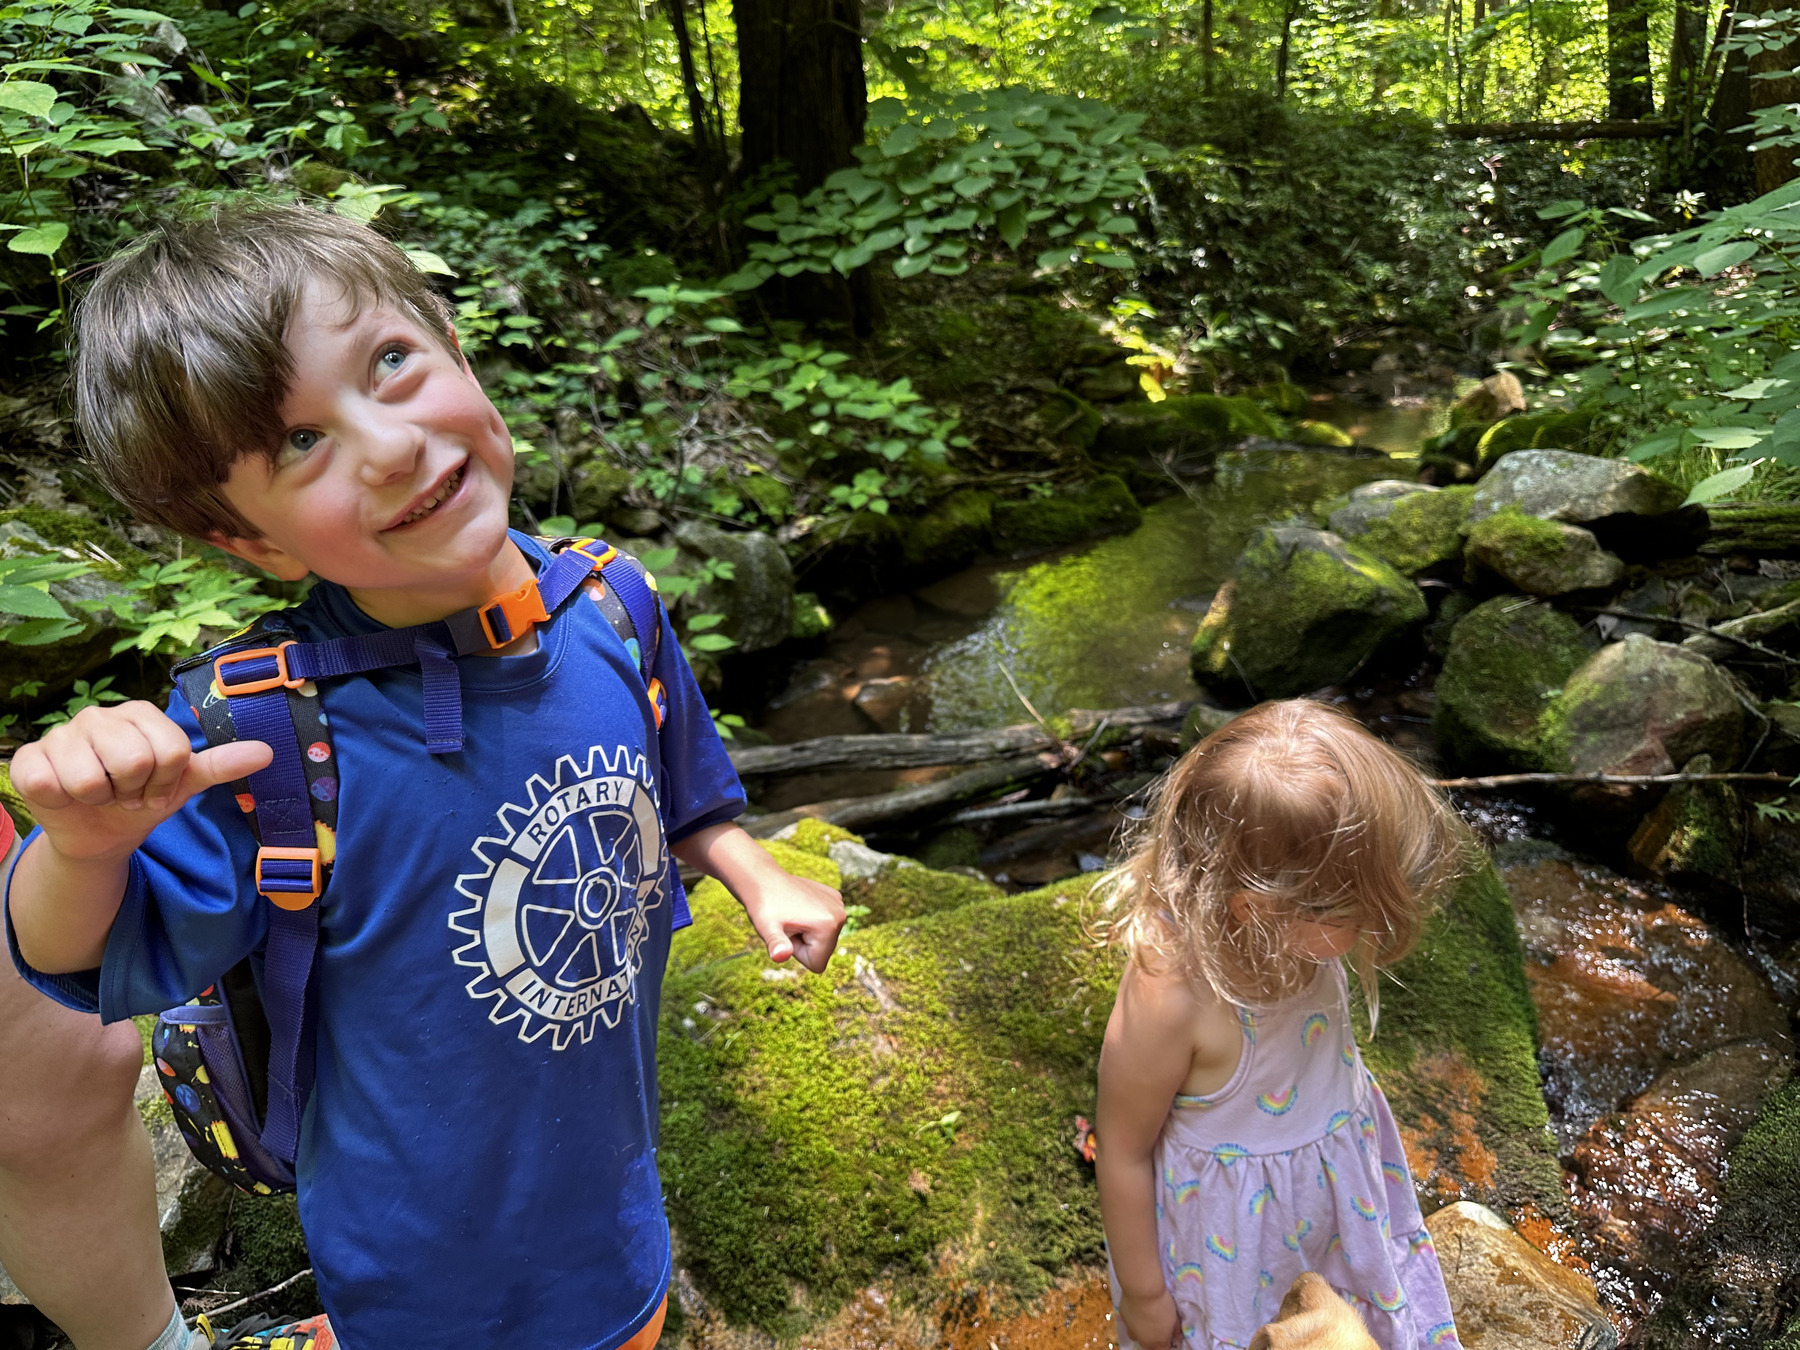 A young boy with a backpack strikes a silly pose for the camera;  a young girl steps over rocks near a mountain stream. Moss and trees and plants up the background. 